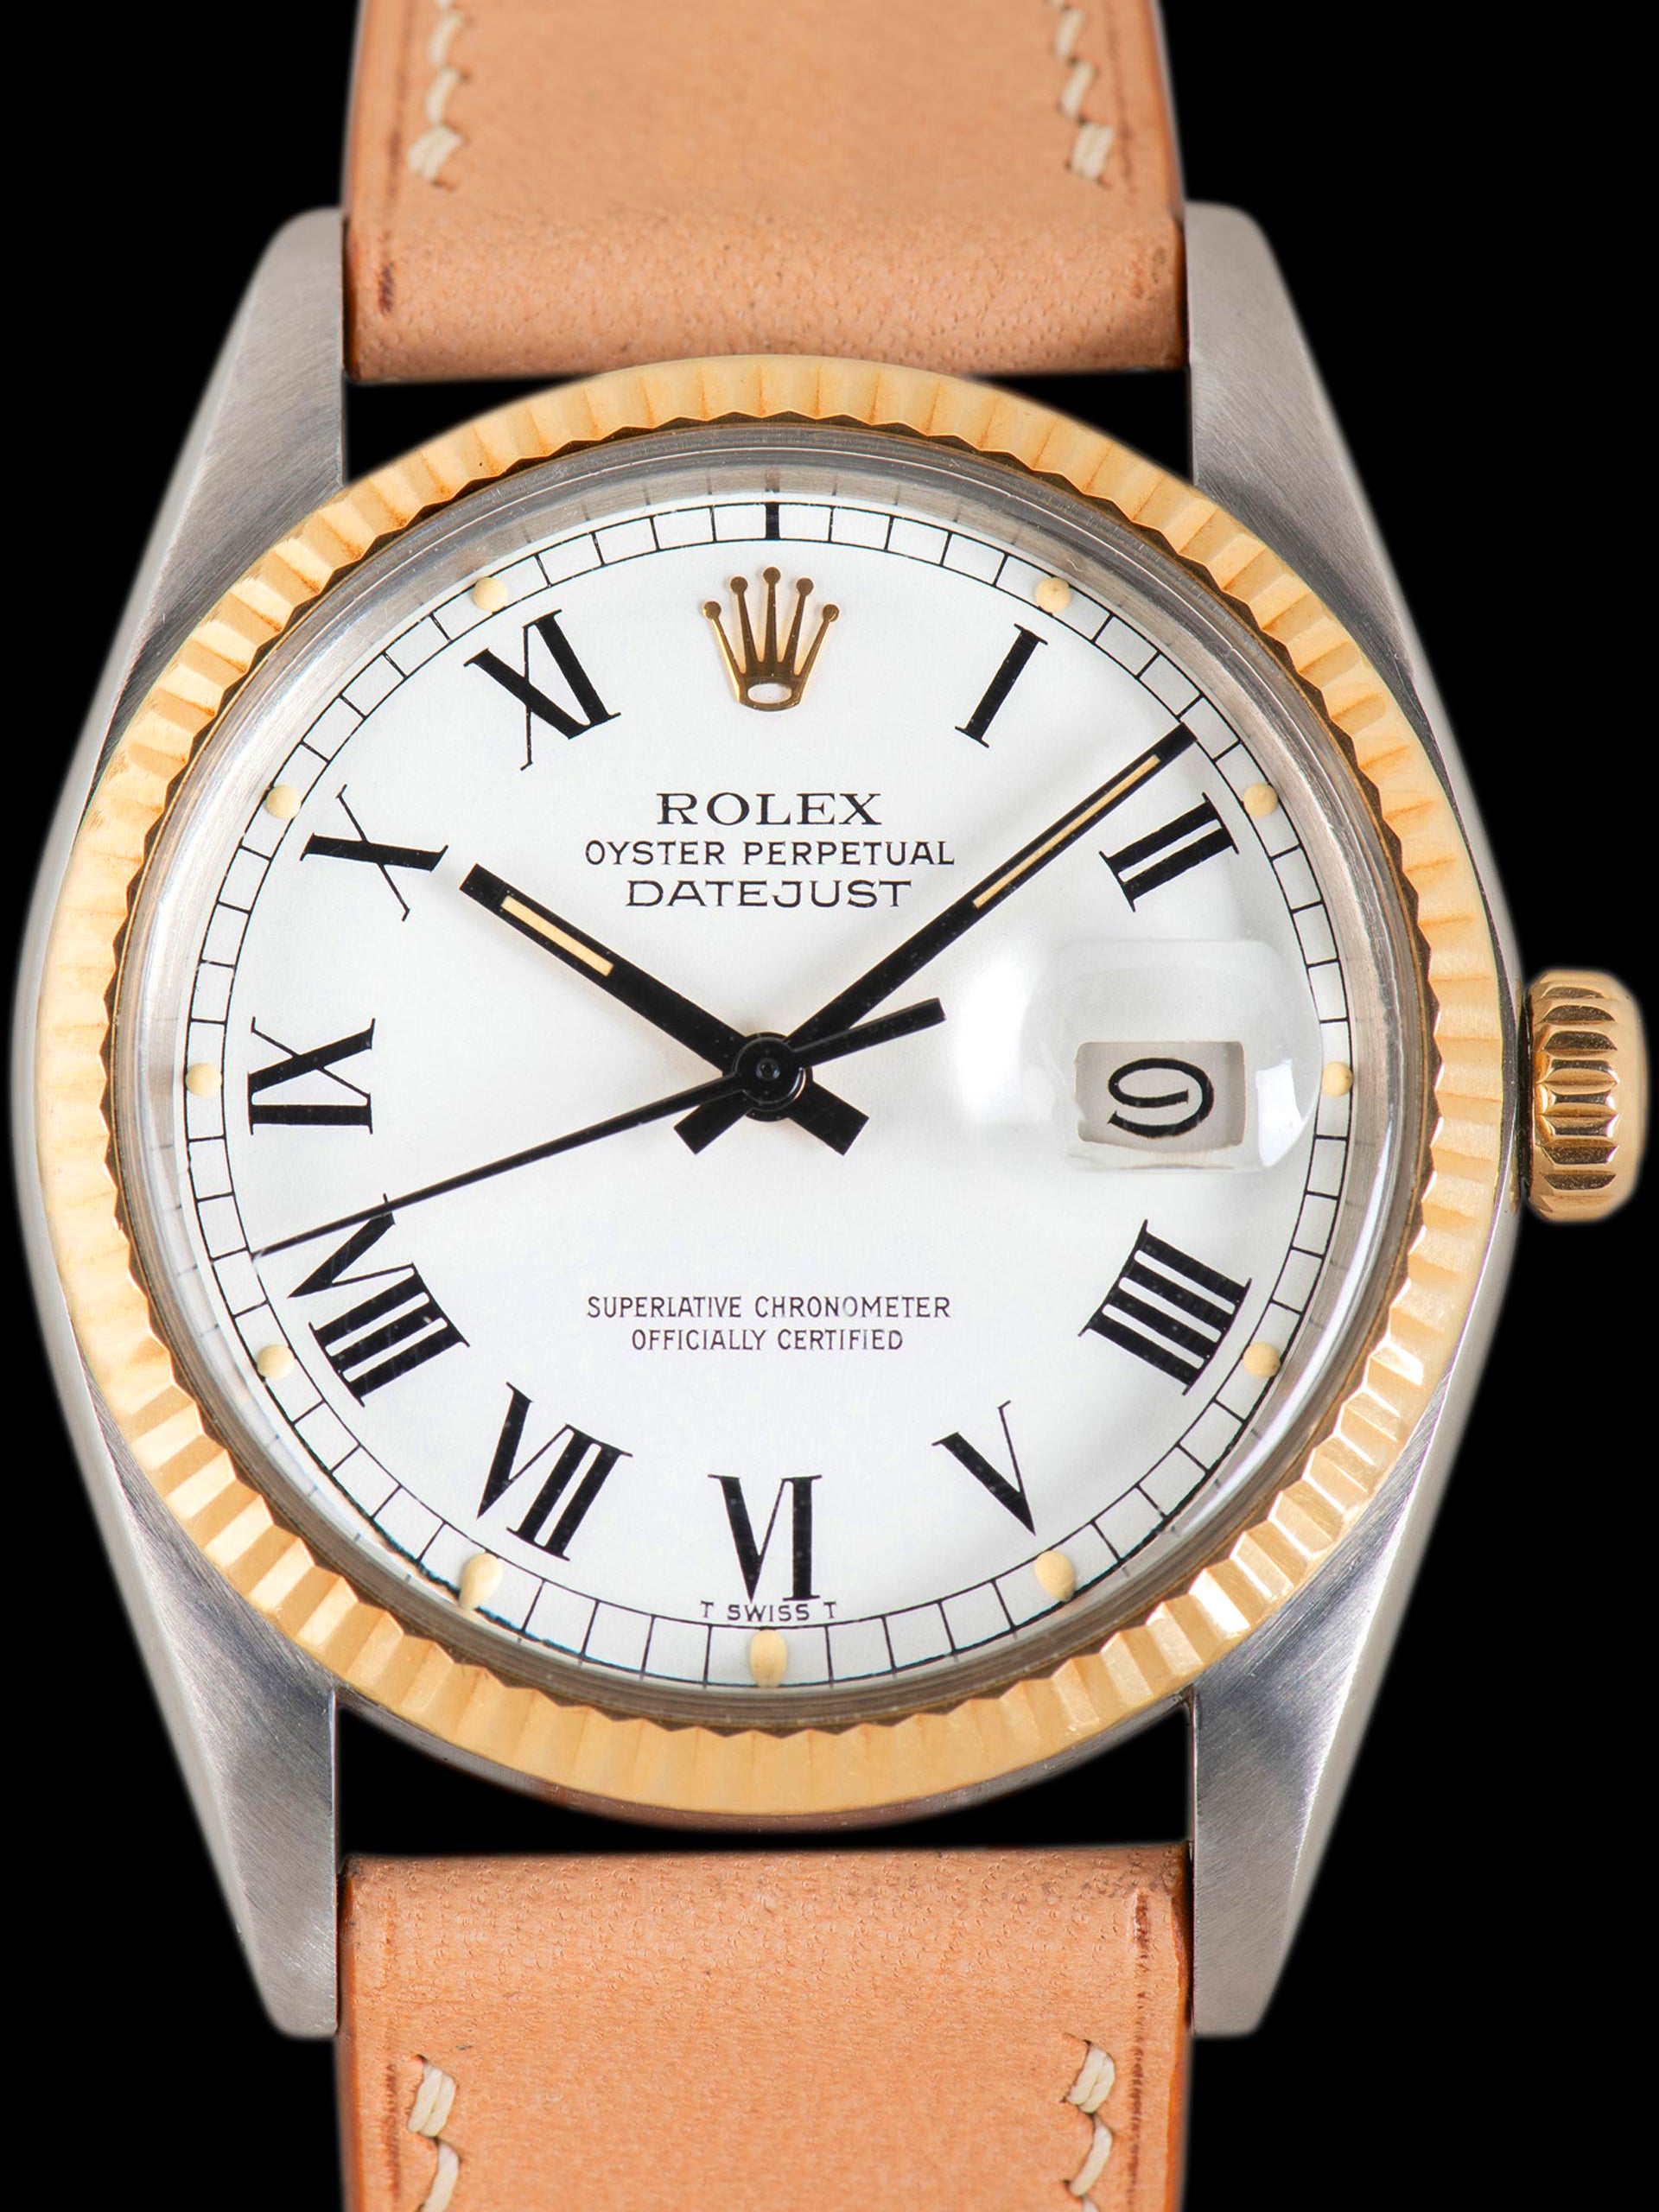 1979 Rolex Two-Tone Datejust (Ref. 16013) White "Buckley" Dial